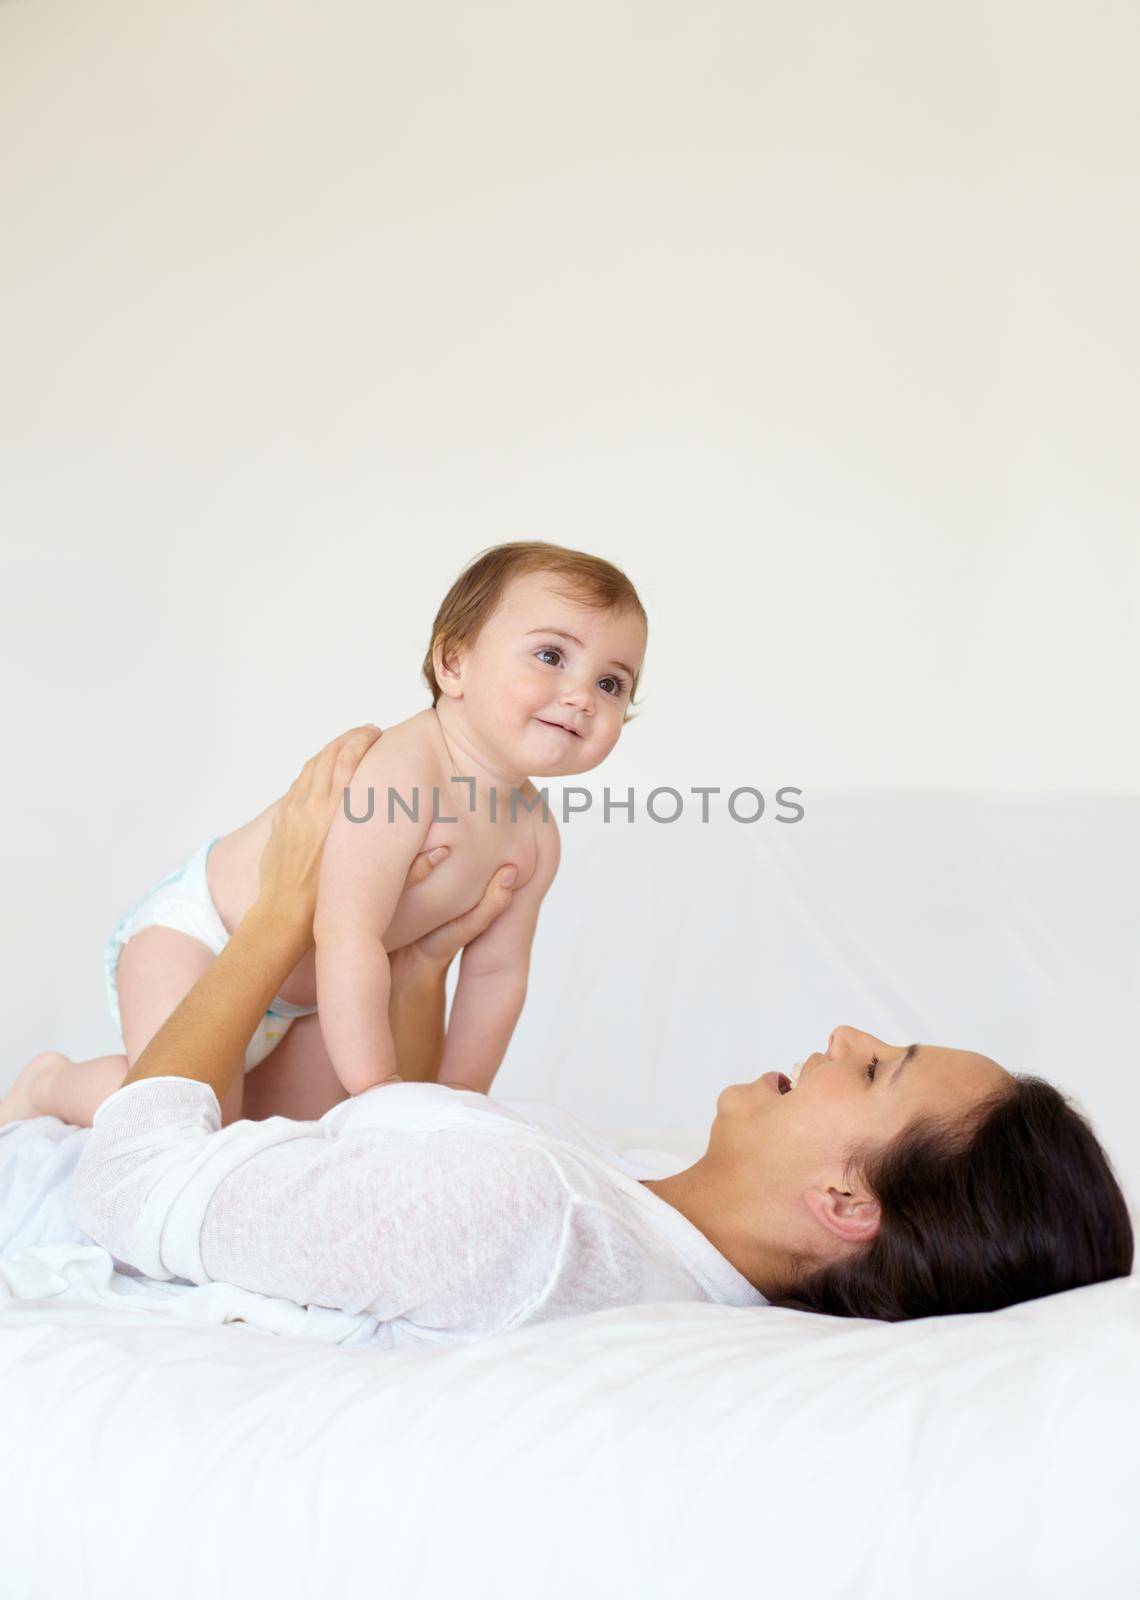 Bonding with my baby. A young mother lying on her back and holding up her baby girl while laughing